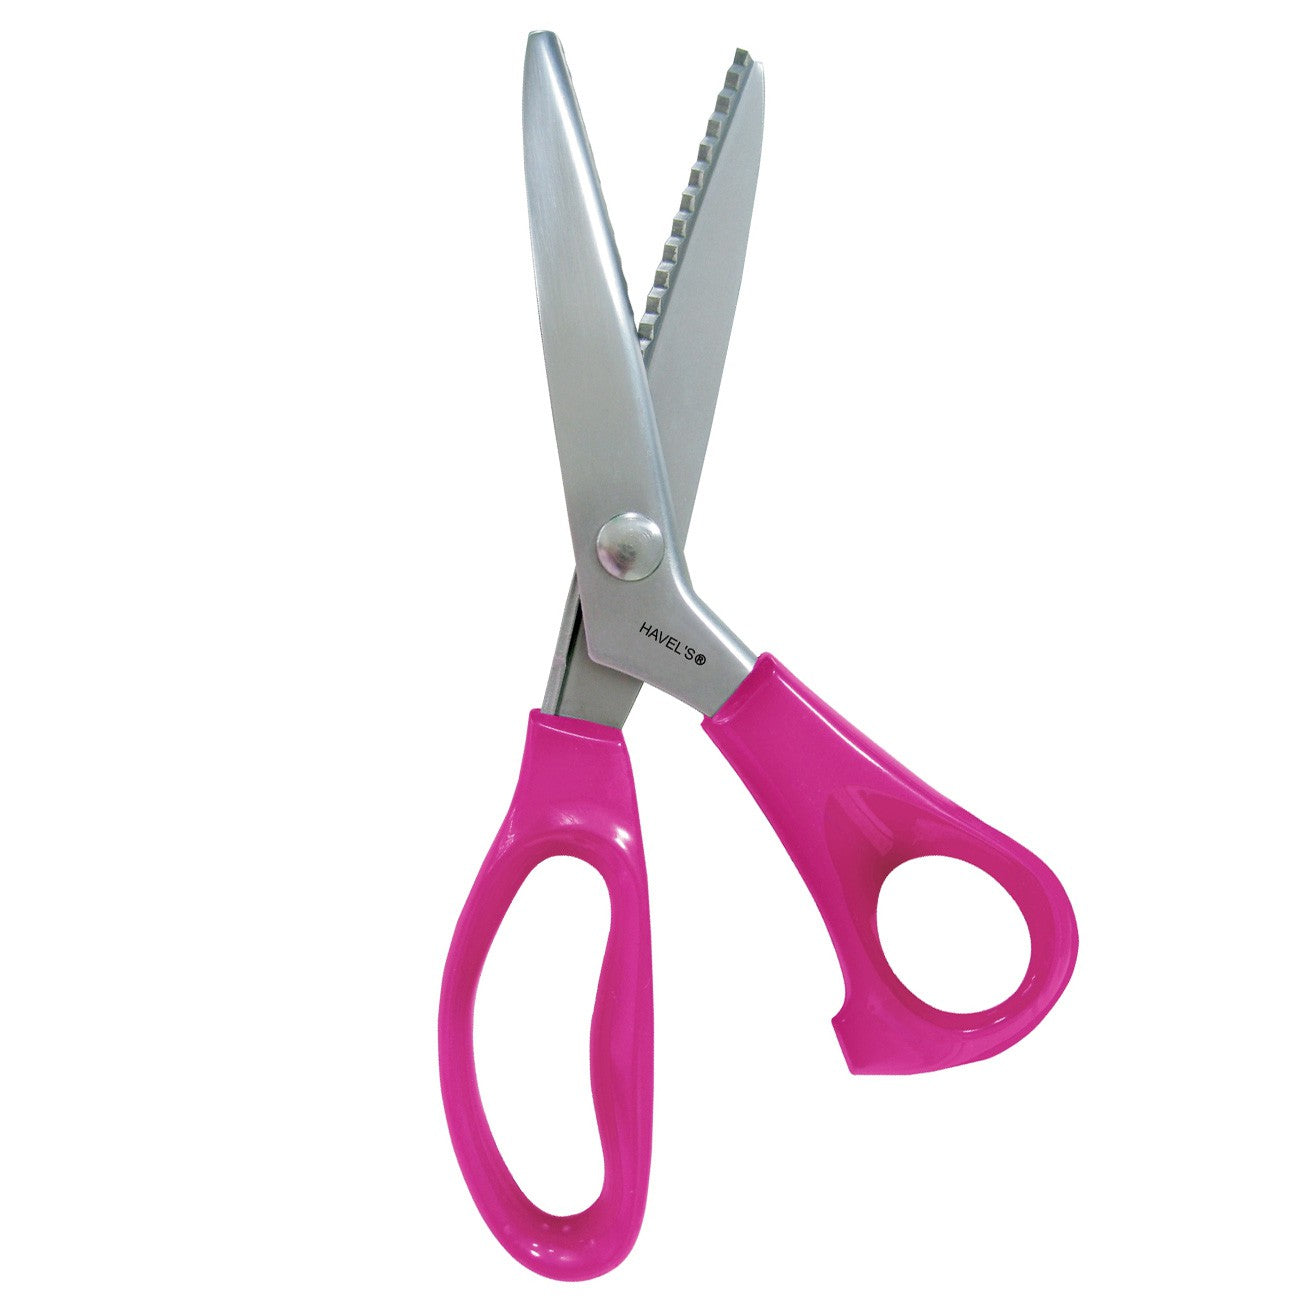 Havel's Sewing Creative 9” Pinking Shears by Joann